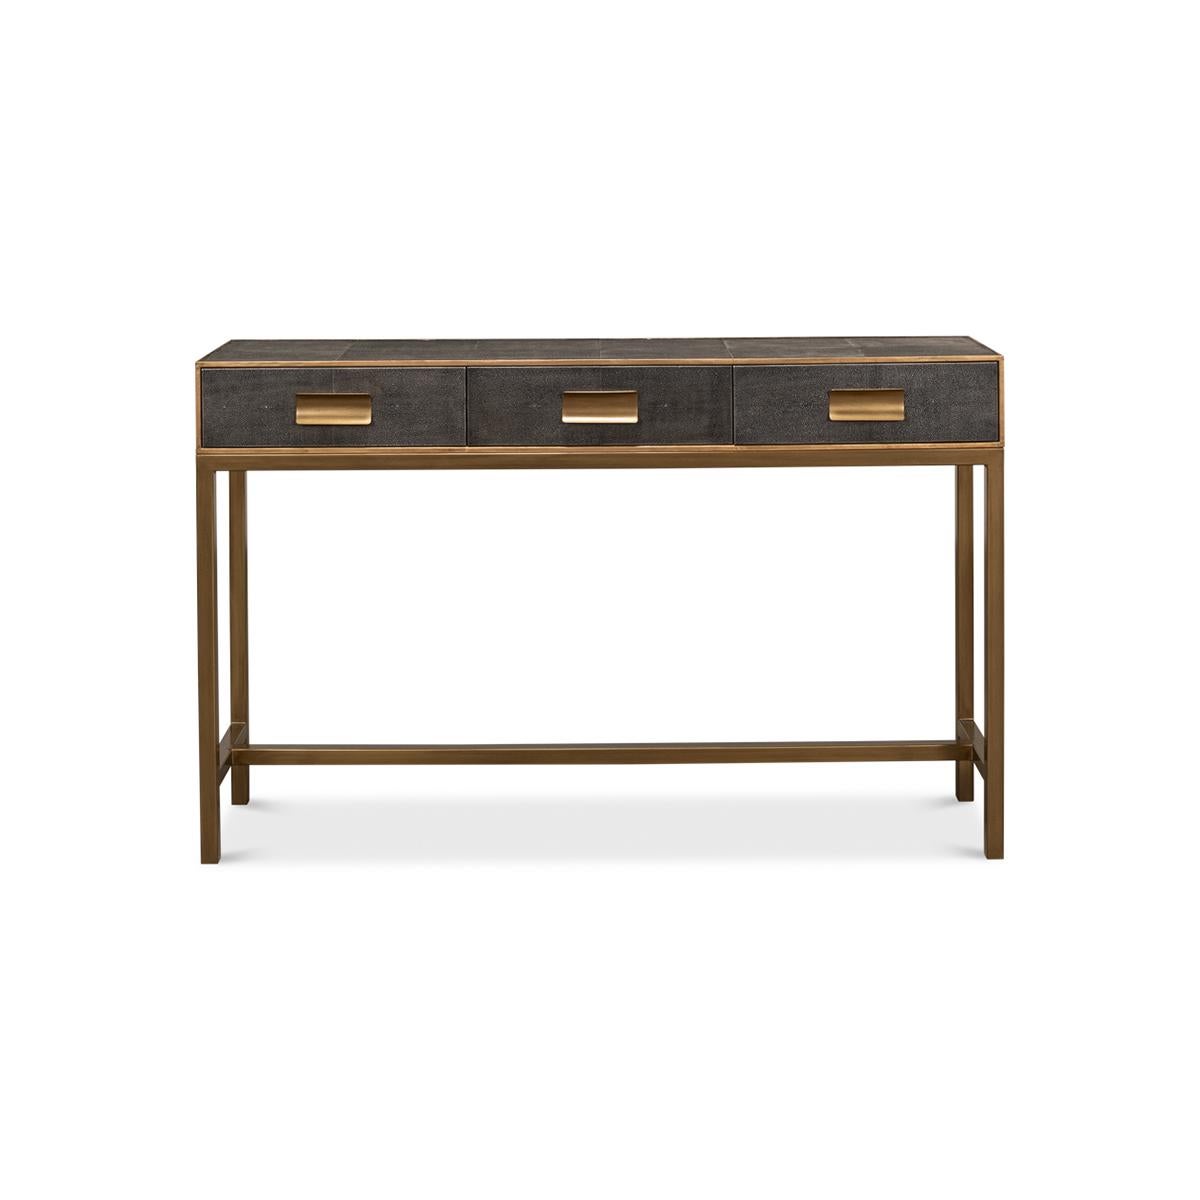 Modern grey leather wrapped console with gilt trim, three frieze drawers with marbleized interiors, brass handles and raised on H stretcher base.

Dimensions: 54